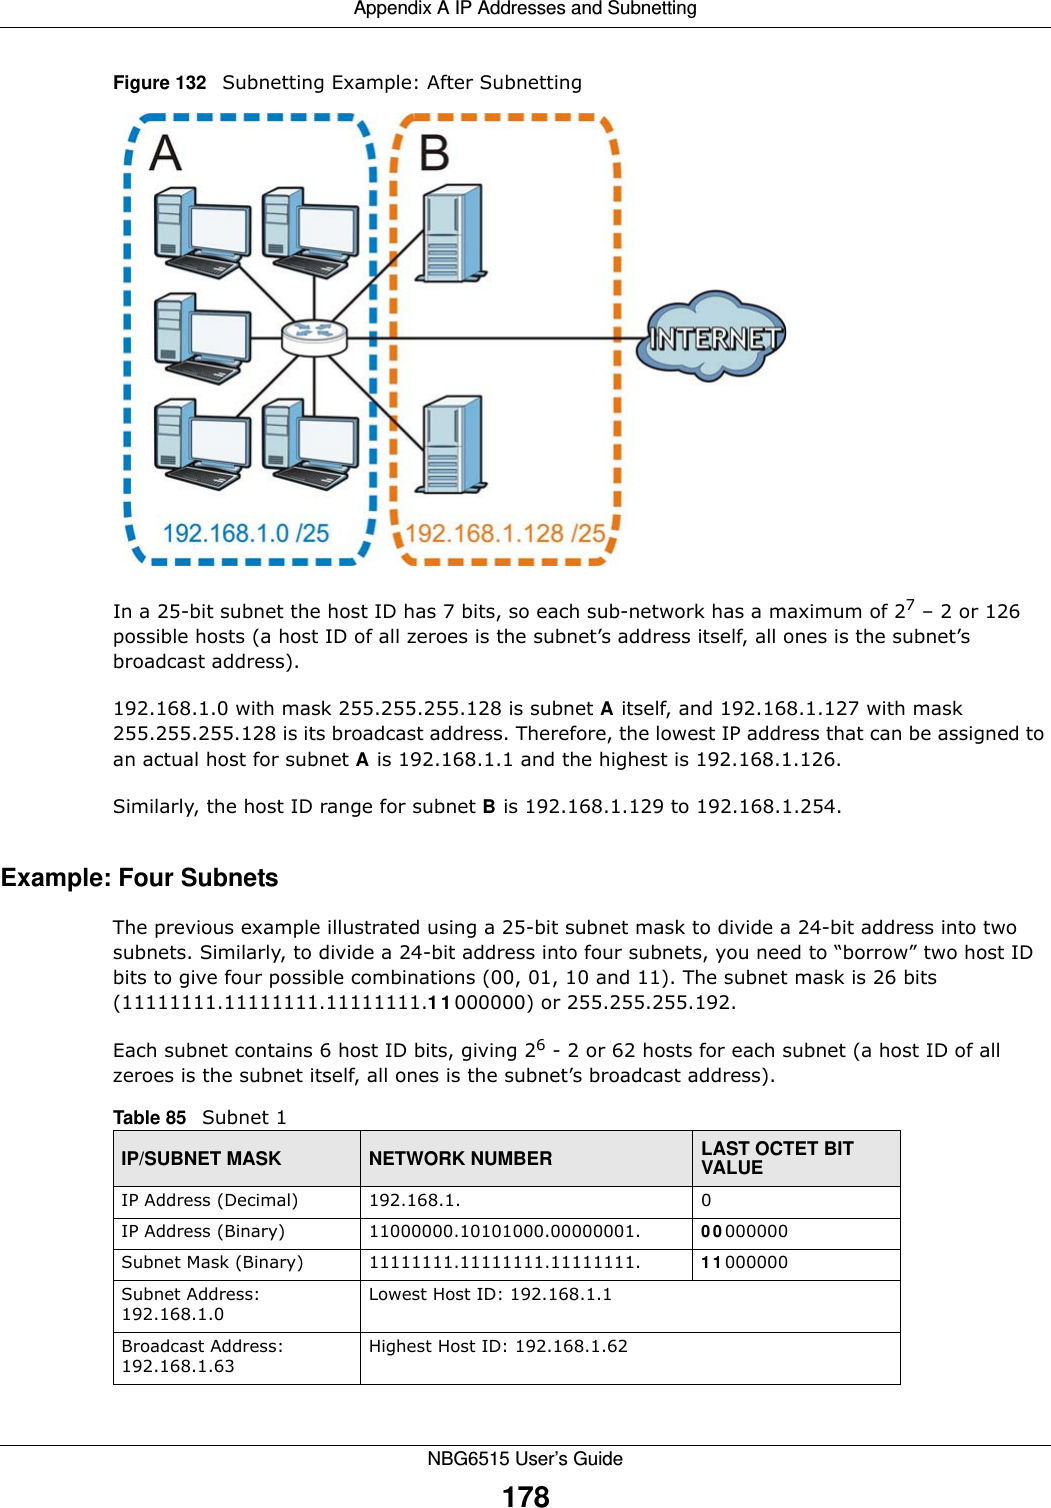 Appendix A IP Addresses and SubnettingNBG6515 User’s Guide178Figure 132   Subnetting Example: After SubnettingIn a 25-bit subnet the host ID has 7 bits, so each sub-network has a maximum of 27 – 2 or 126 possible hosts (a host ID of all zeroes is the subnet’s address itself, all ones is the subnet’s broadcast address).192.168.1.0 with mask 255.255.255.128 is subnet A itself, and 192.168.1.127 with mask 255.255.255.128 is its broadcast address. Therefore, the lowest IP address that can be assigned to an actual host for subnet A is 192.168.1.1 and the highest is 192.168.1.126. Similarly, the host ID range for subnet B is 192.168.1.129 to 192.168.1.254.Example: Four Subnets The previous example illustrated using a 25-bit subnet mask to divide a 24-bit address into two subnets. Similarly, to divide a 24-bit address into four subnets, you need to “borrow” two host ID bits to give four possible combinations (00, 01, 10 and 11). The subnet mask is 26 bits (11111111.11111111.11111111.1 1 000000) or 255.255.255.192. Each subnet contains 6 host ID bits, giving 26 - 2 or 62 hosts for each subnet (a host ID of all zeroes is the subnet itself, all ones is the subnet’s broadcast address). Table 85   Subnet 1IP/SUBNET MASK NETWORK NUMBER LAST OCTET BIT VALUEIP Address (Decimal) 192.168.1. 0IP Address (Binary) 11000000.10101000.00000001. 0 0 000000Subnet Mask (Binary) 11111111.11111111.11111111. 1 1 000000Subnet Address: 192.168.1.0Lowest Host ID: 192.168.1.1Broadcast Address: 192.168.1.63Highest Host ID: 192.168.1.62